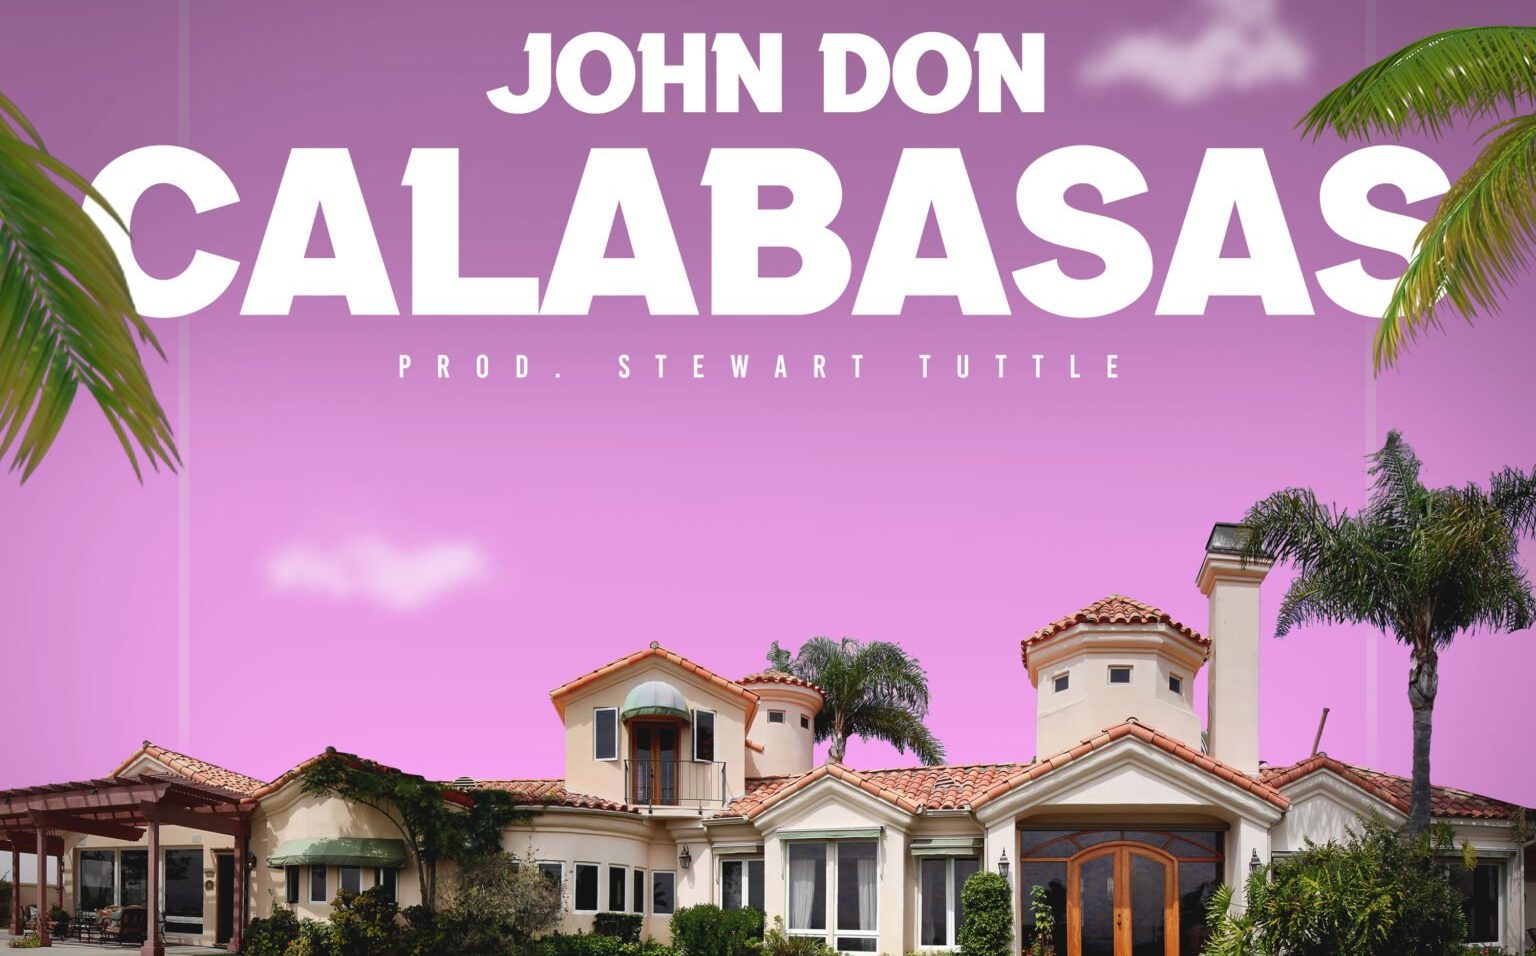 John Don’s New Record “Calabasas” Is Taking Off